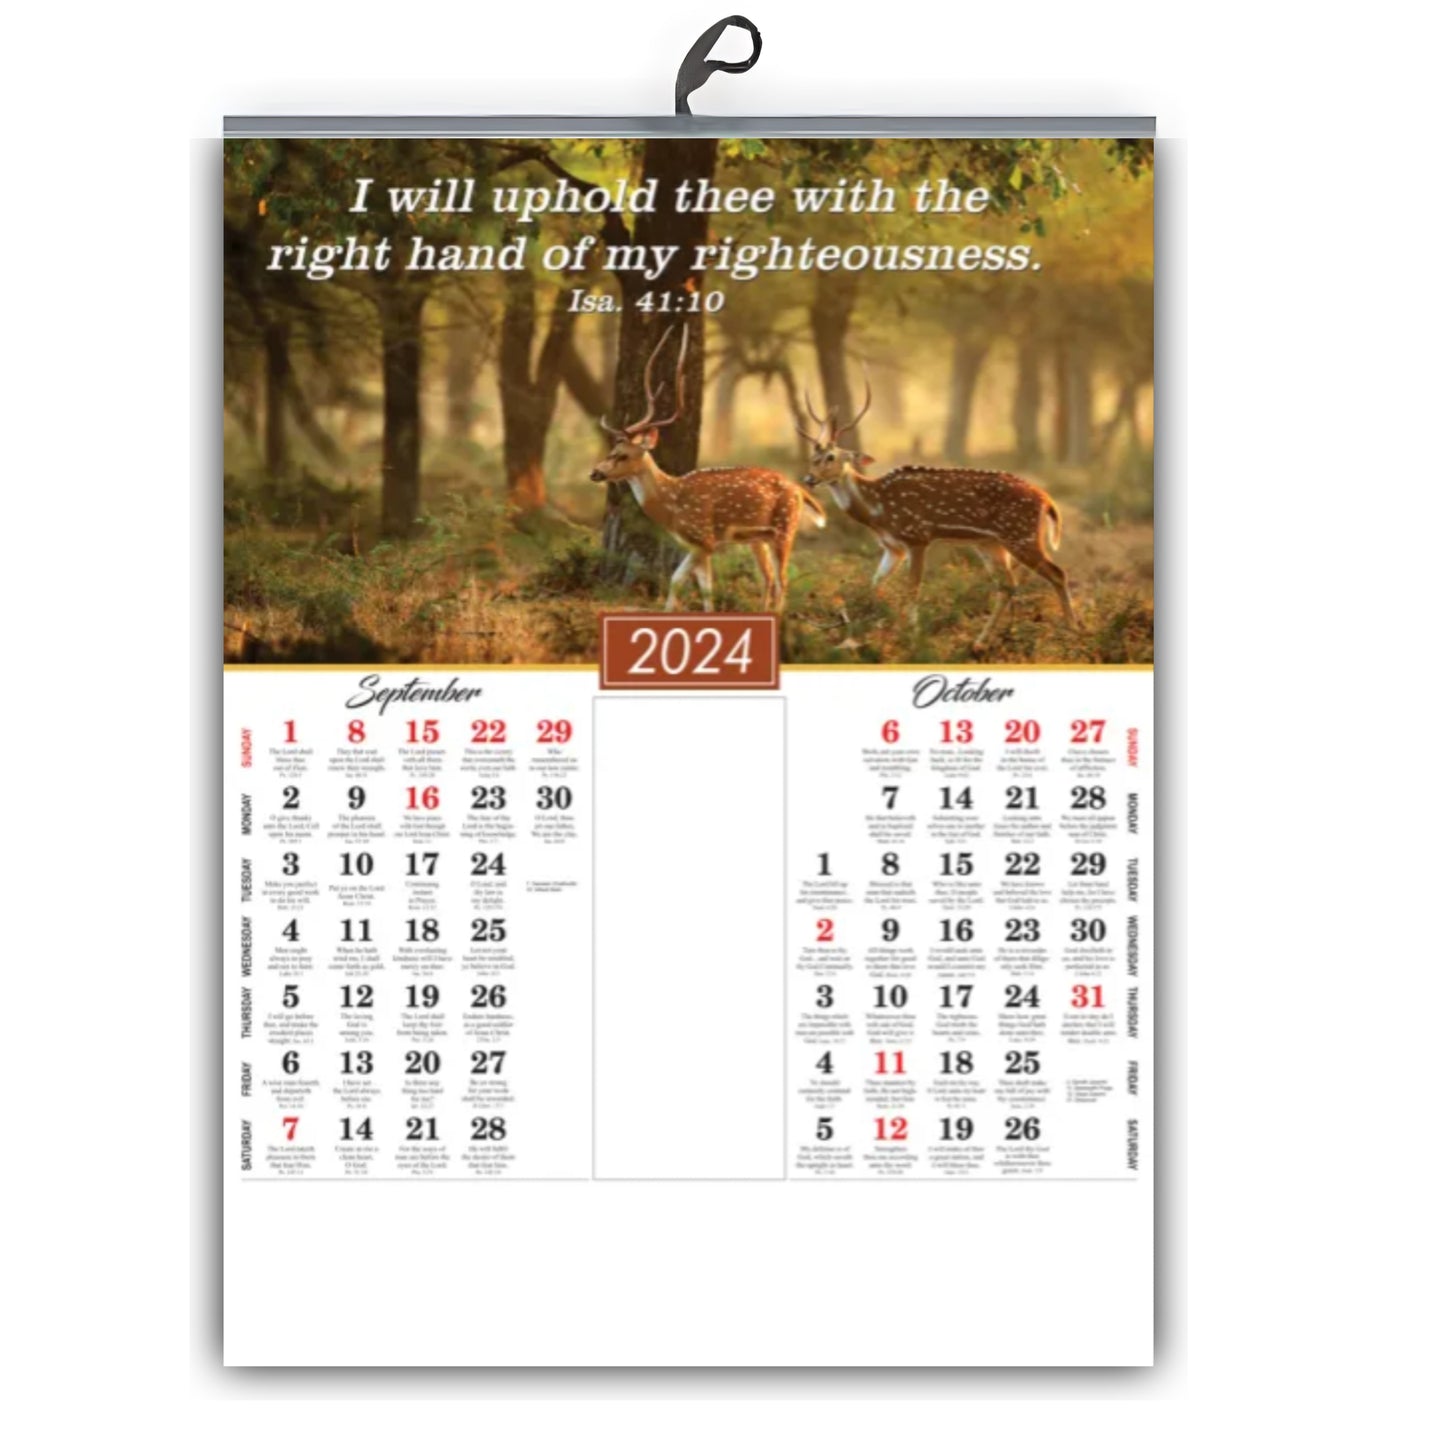 2024 English Christian Bible Verse Wall Calendar - Blessed Promises and Scenic Beauty